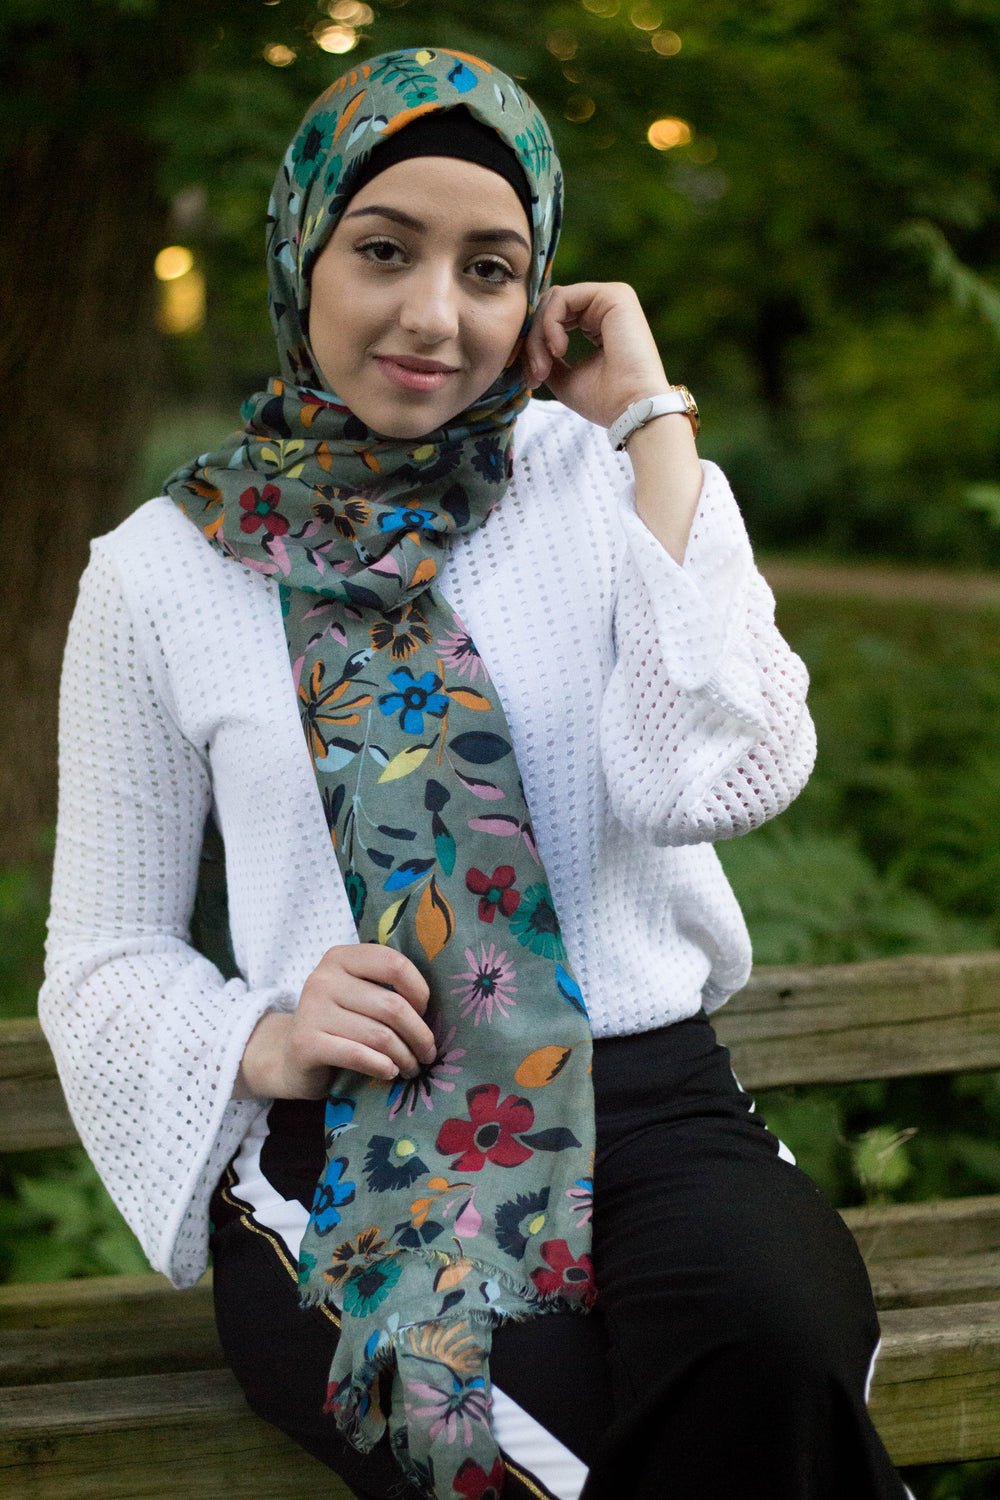 muslim woman wearing a green hijab with floral prints in multiple colors: yellow, red, blue, green,orange, and pink